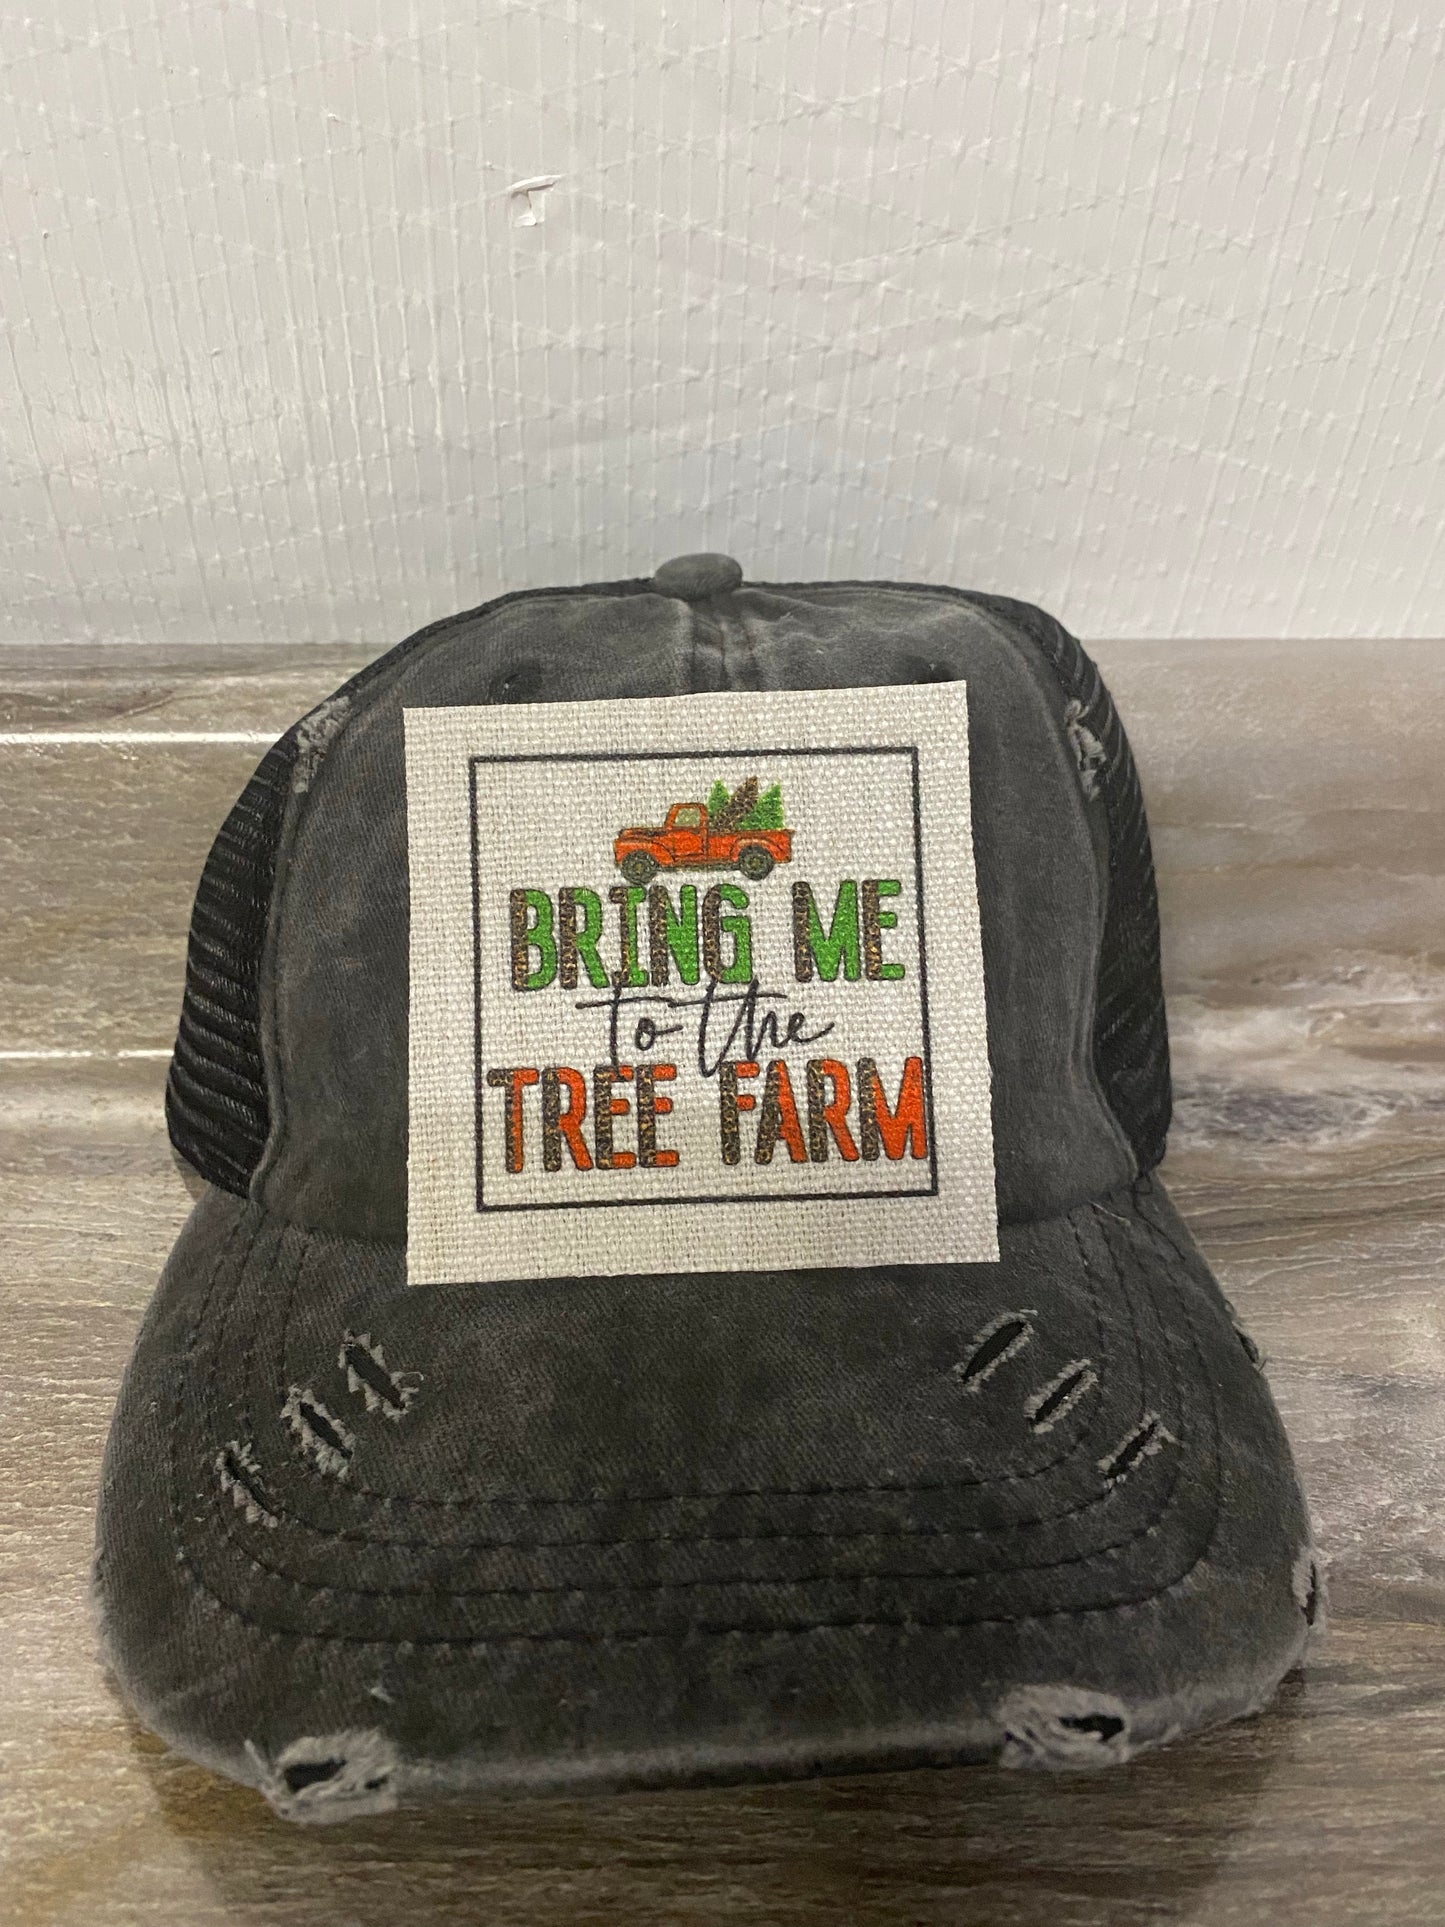 Bring Me To The Tree Farm Hat Patch